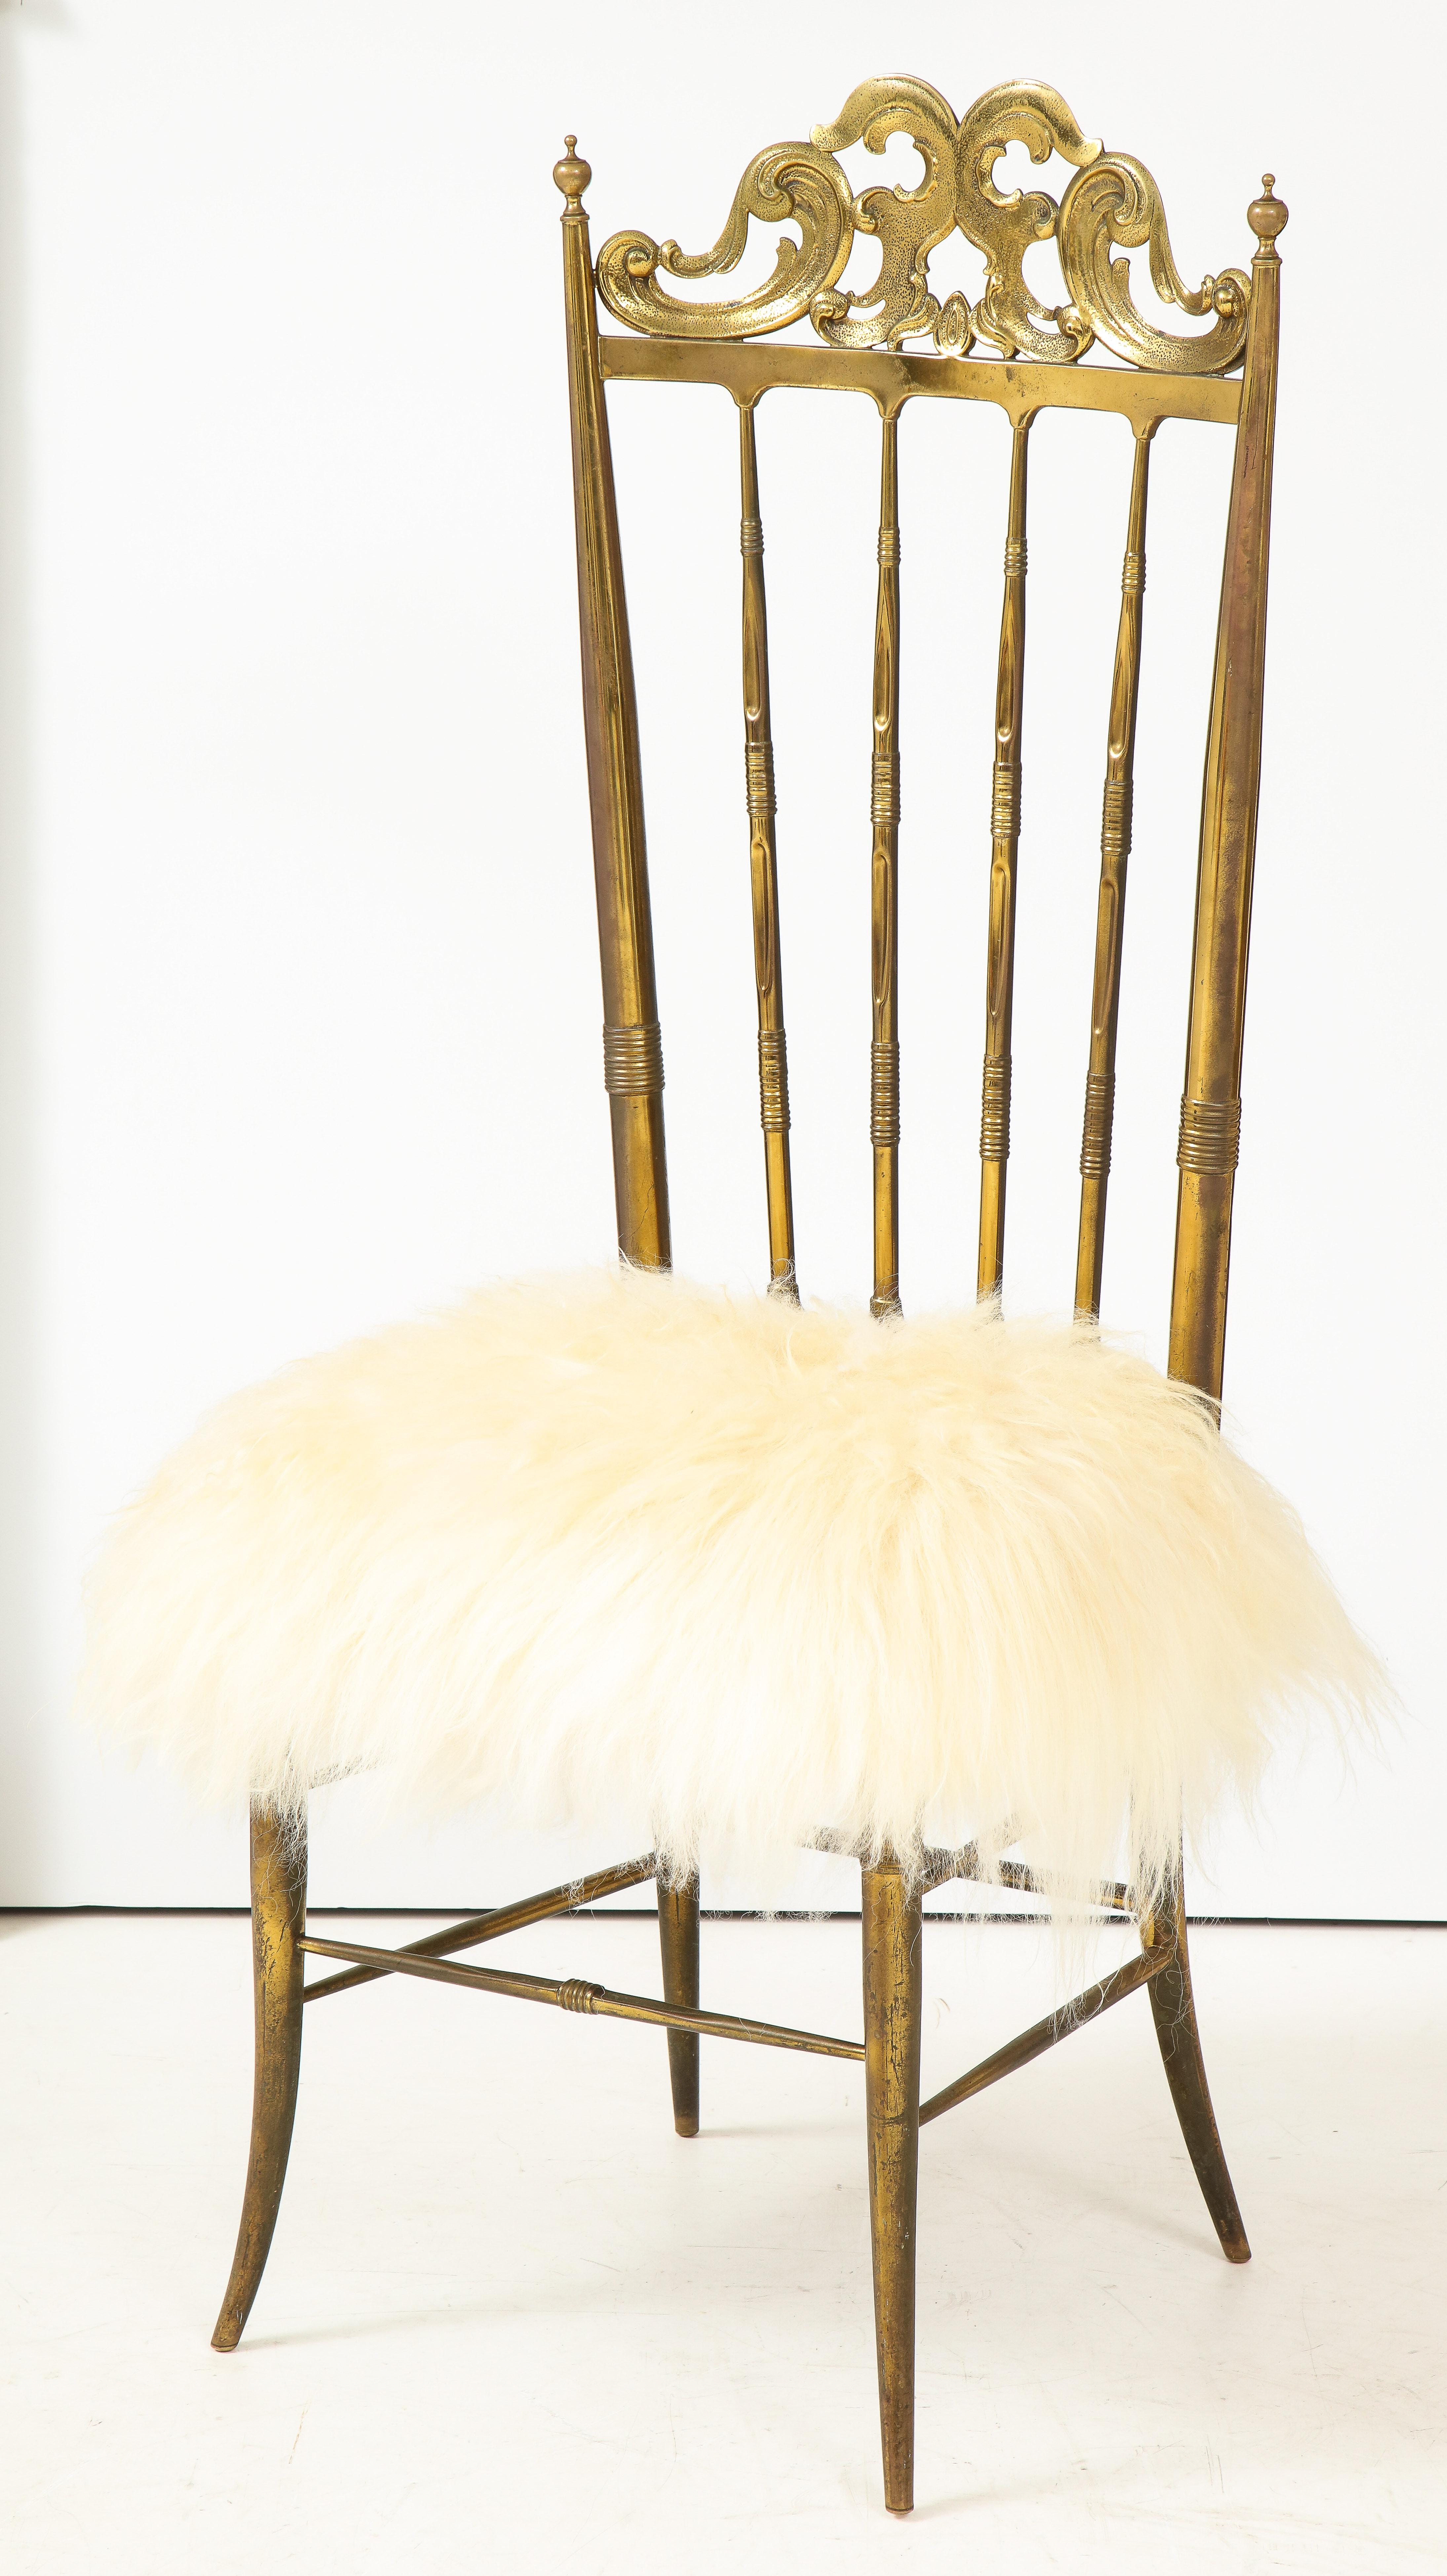 Italian midcentury Classic chair by Chiavari with great aged brass frame and new long haired sheepskin seat.